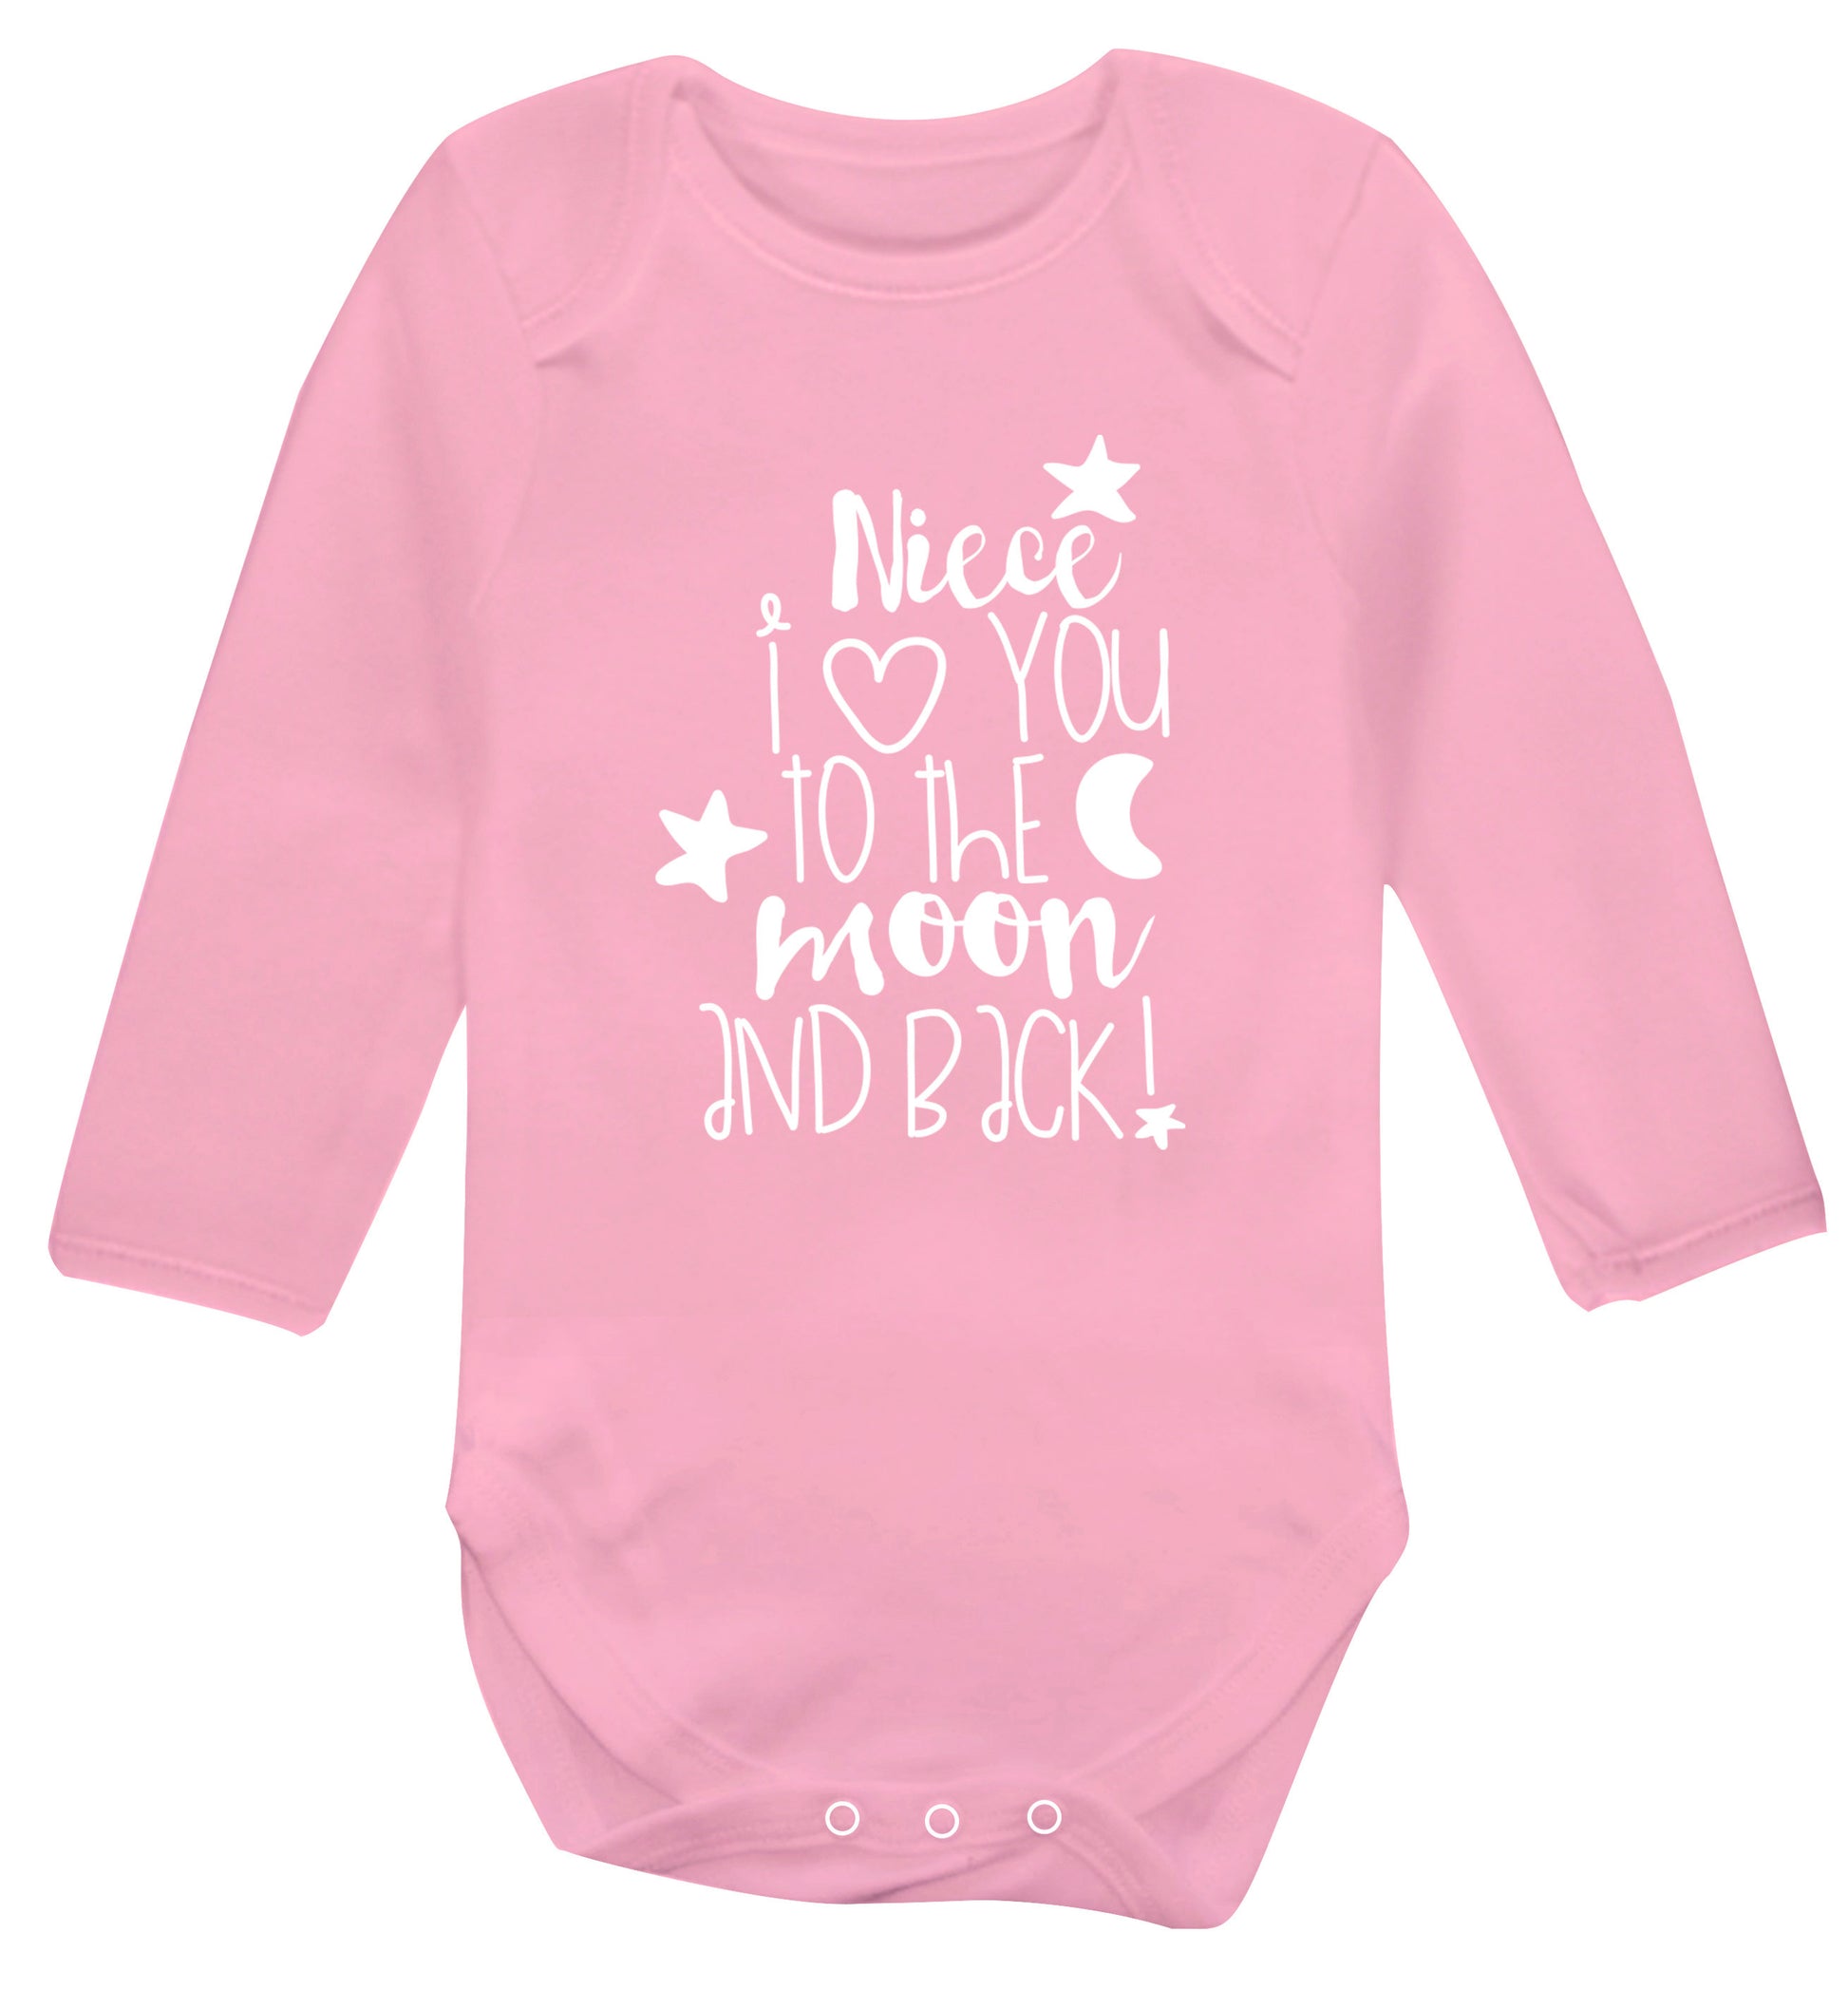 Niece I love you to the moon and back Baby Vest long sleeved pale pink 6-12 months